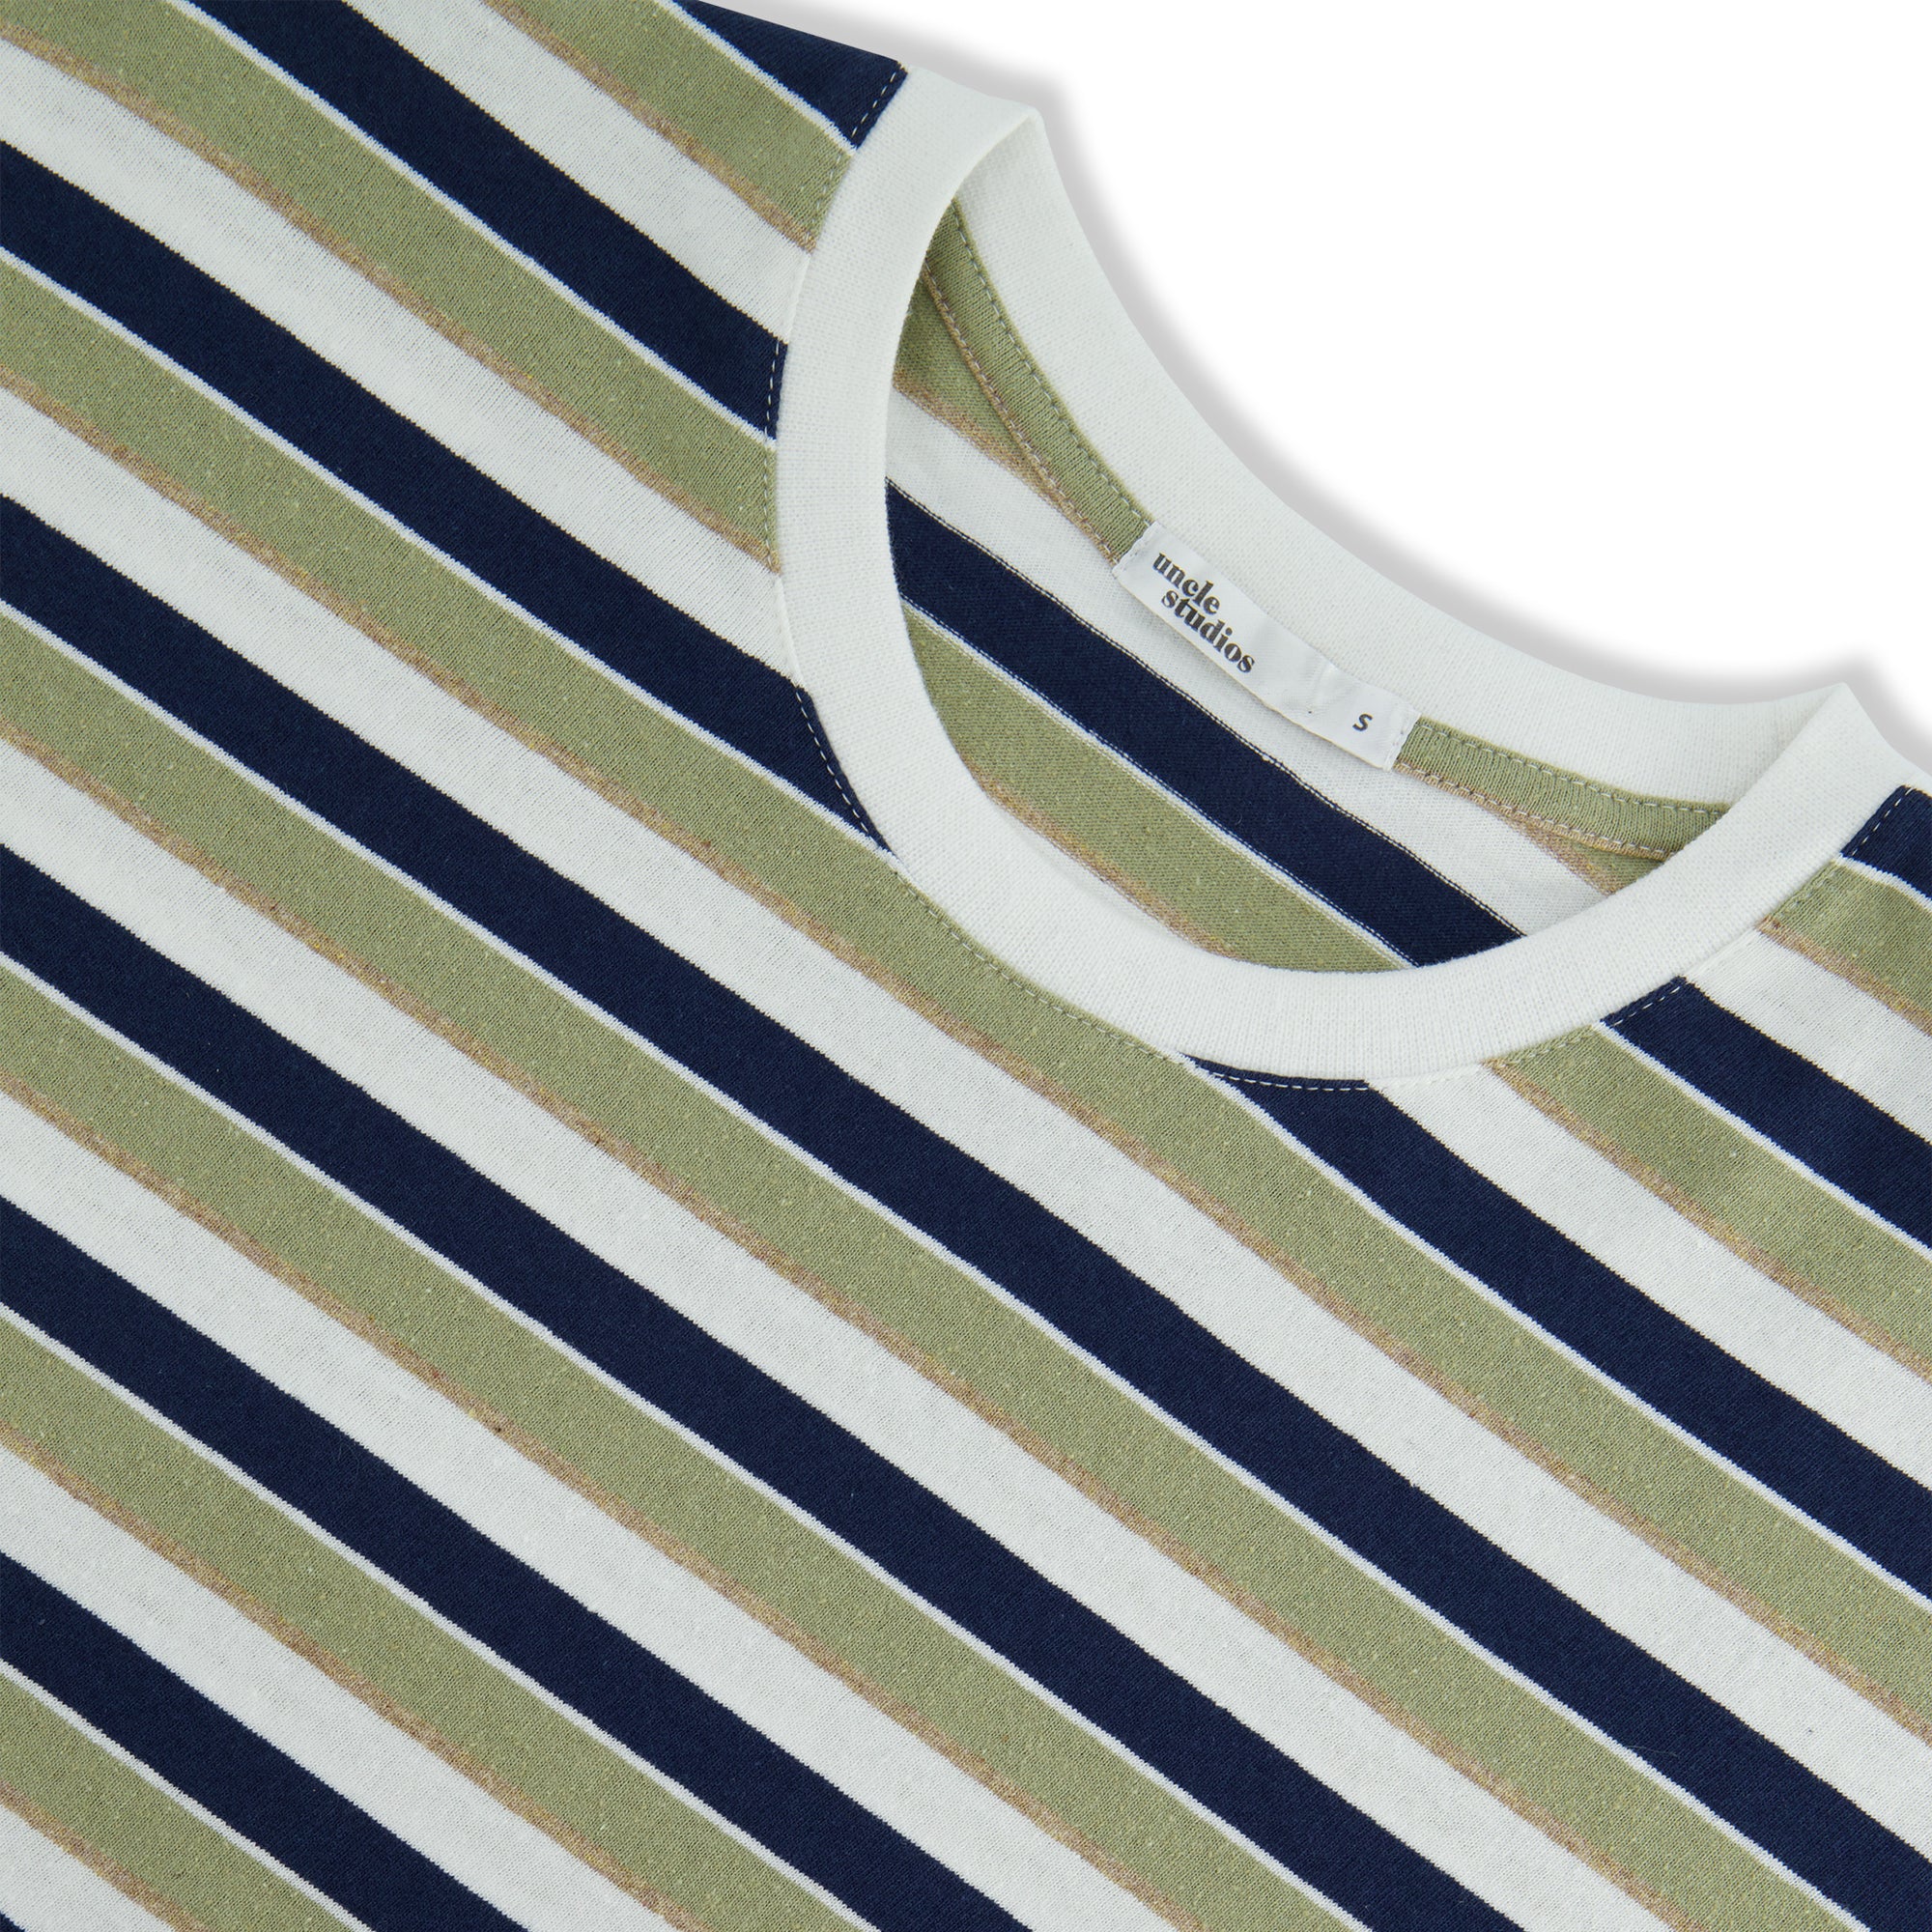 THE STRIPED TEE